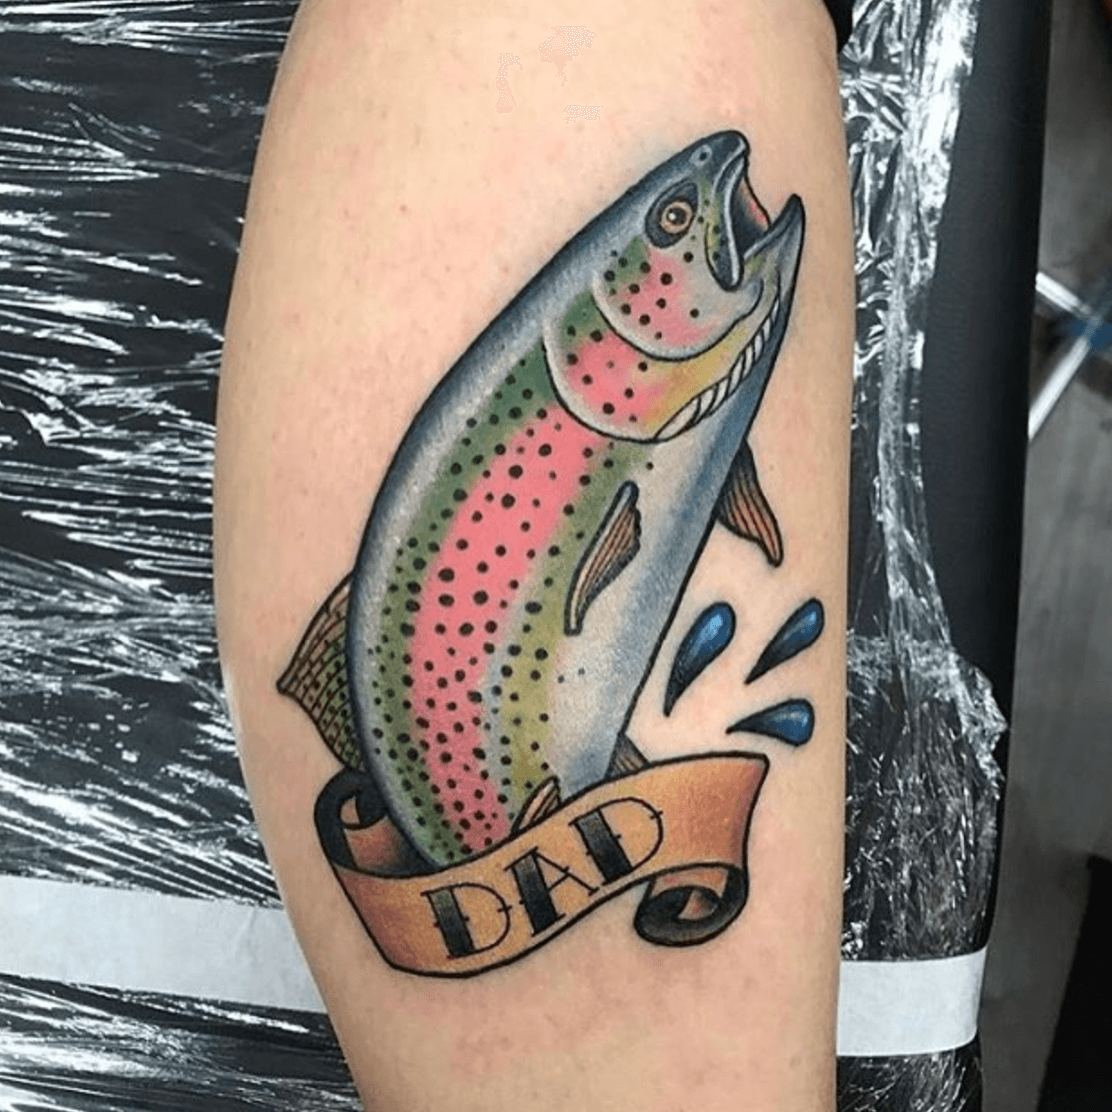 Tattoo uploaded by Addicted To Ink  Rainbow trout done by coryhaberman  here at addictedtoinkny Stop in during regular business hours to consult  with Cory or any of our team of talented